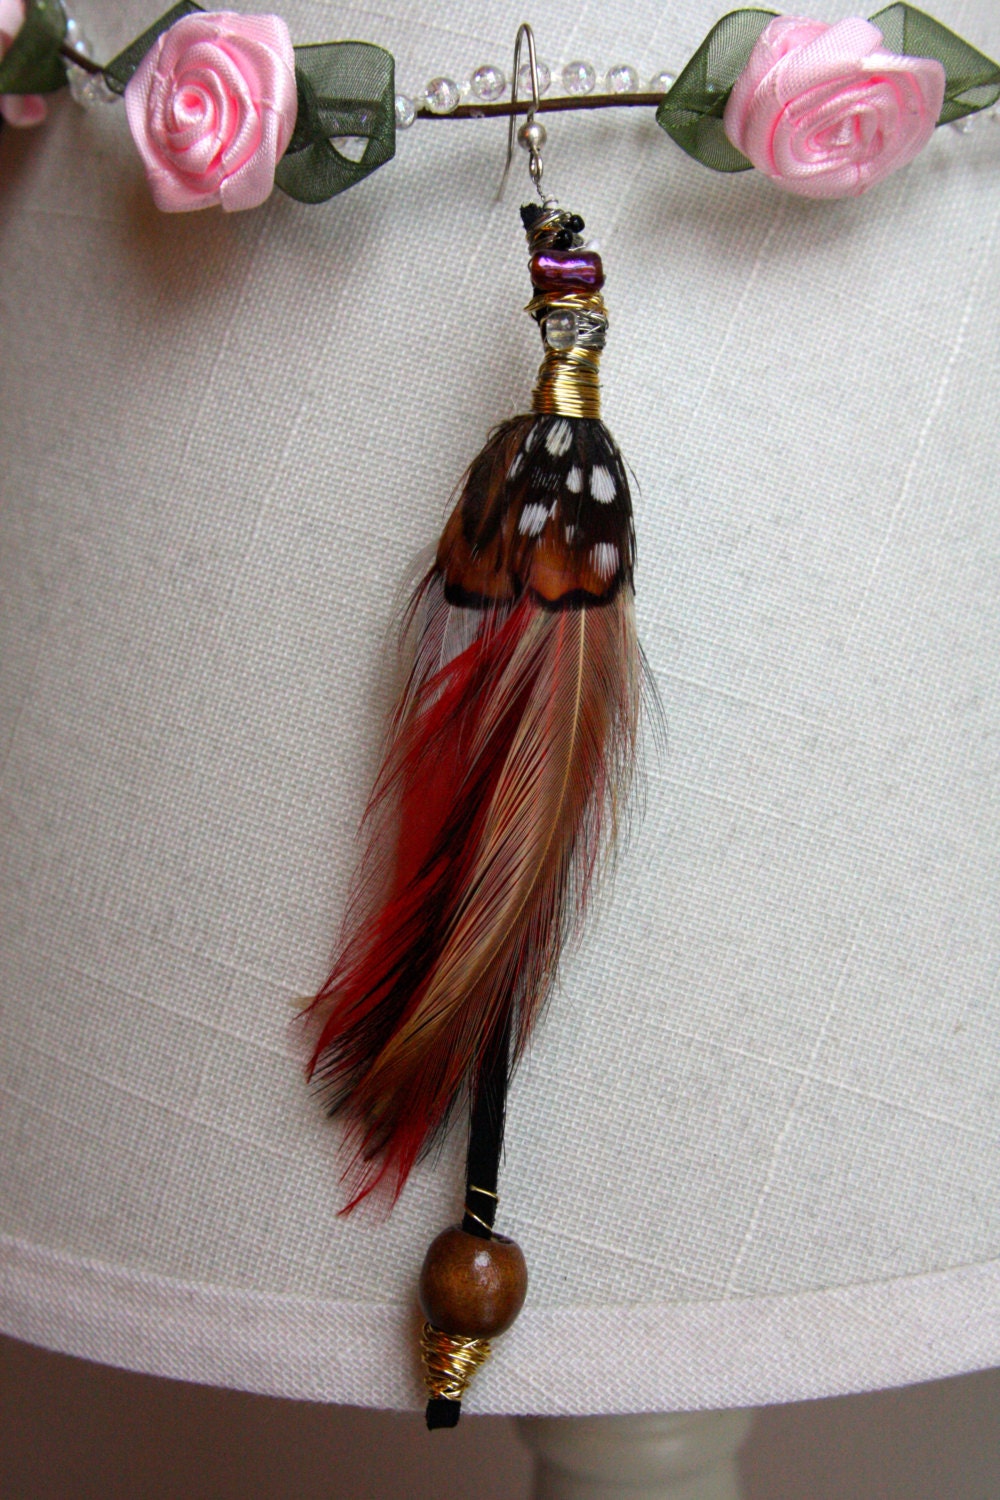 Red/Amber/Black Spotted Faux Feather Earring with Black, Purple, and Wooden Beads, Black Suede, and Gold Wire